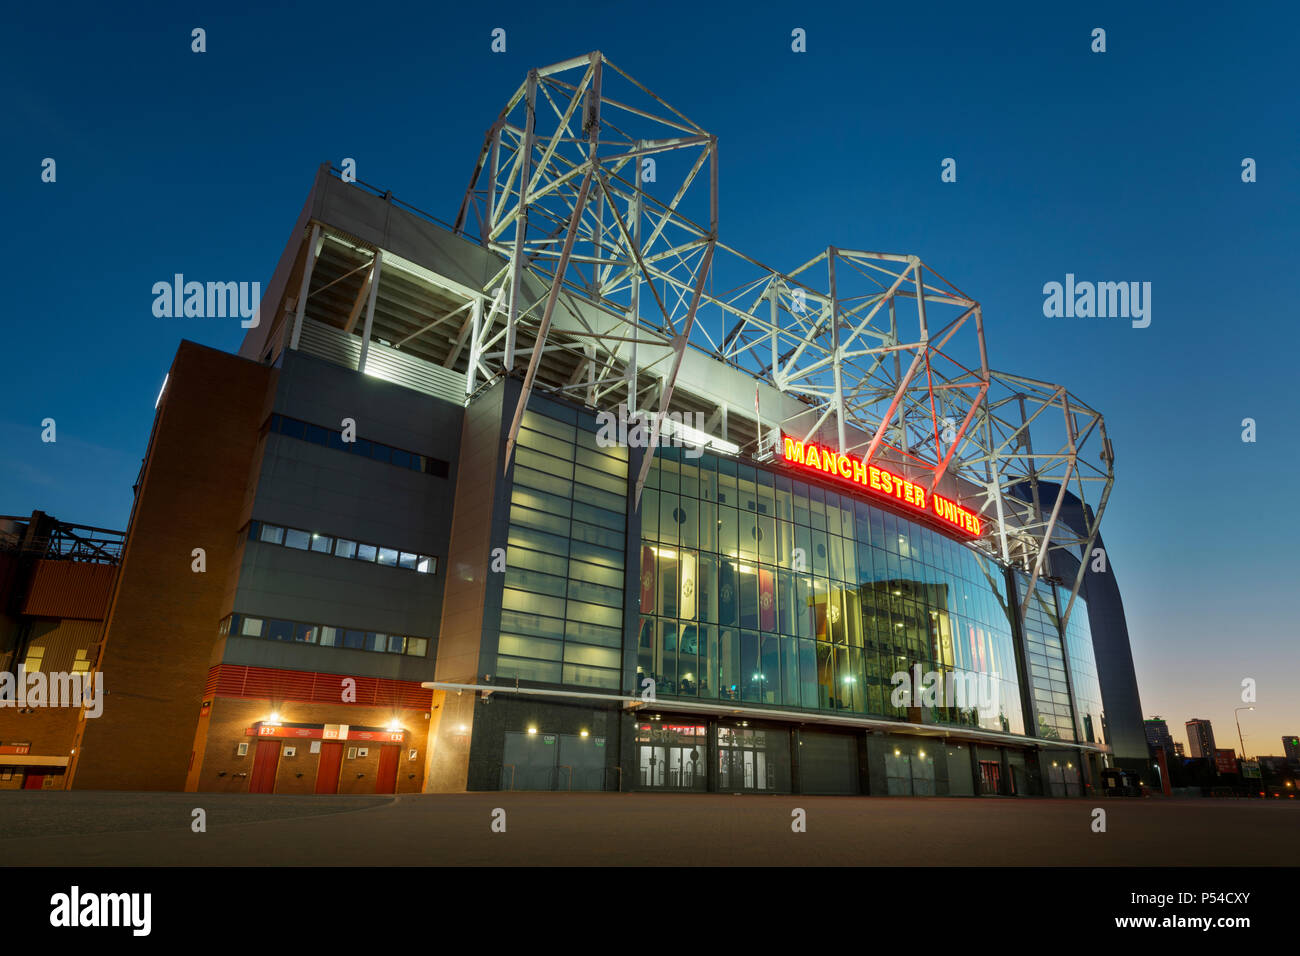 Old Trafford stadium, home of Manchester United Football Club, during a summer's evening (Editorial use only). Stock Photo